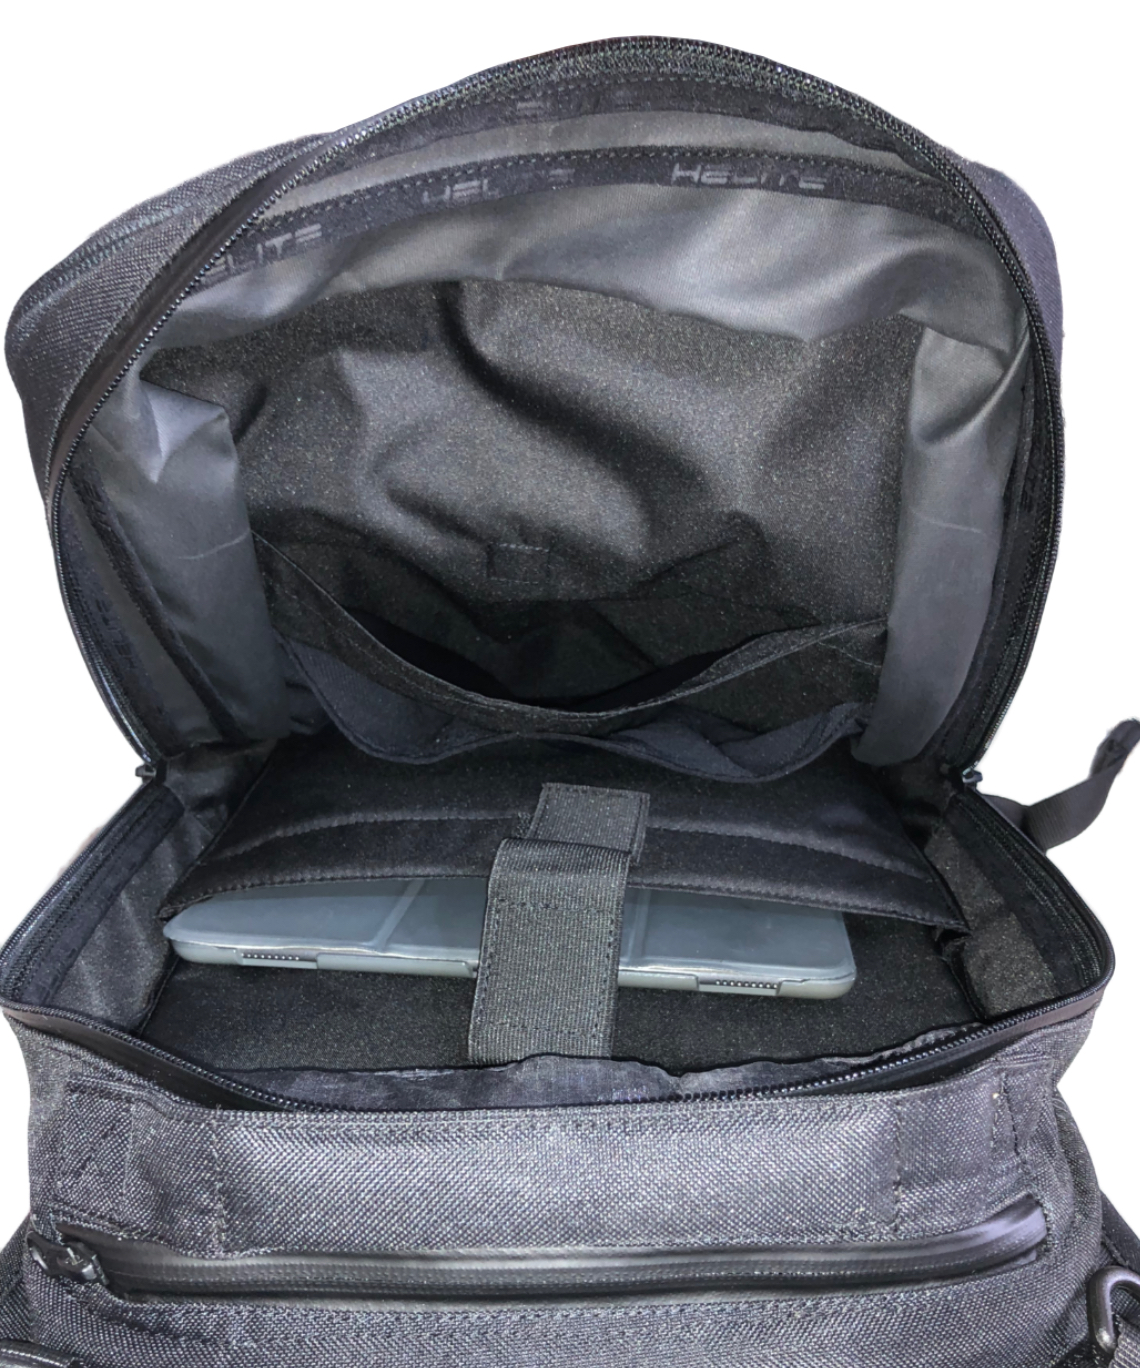 Airbag Backpack Inside View